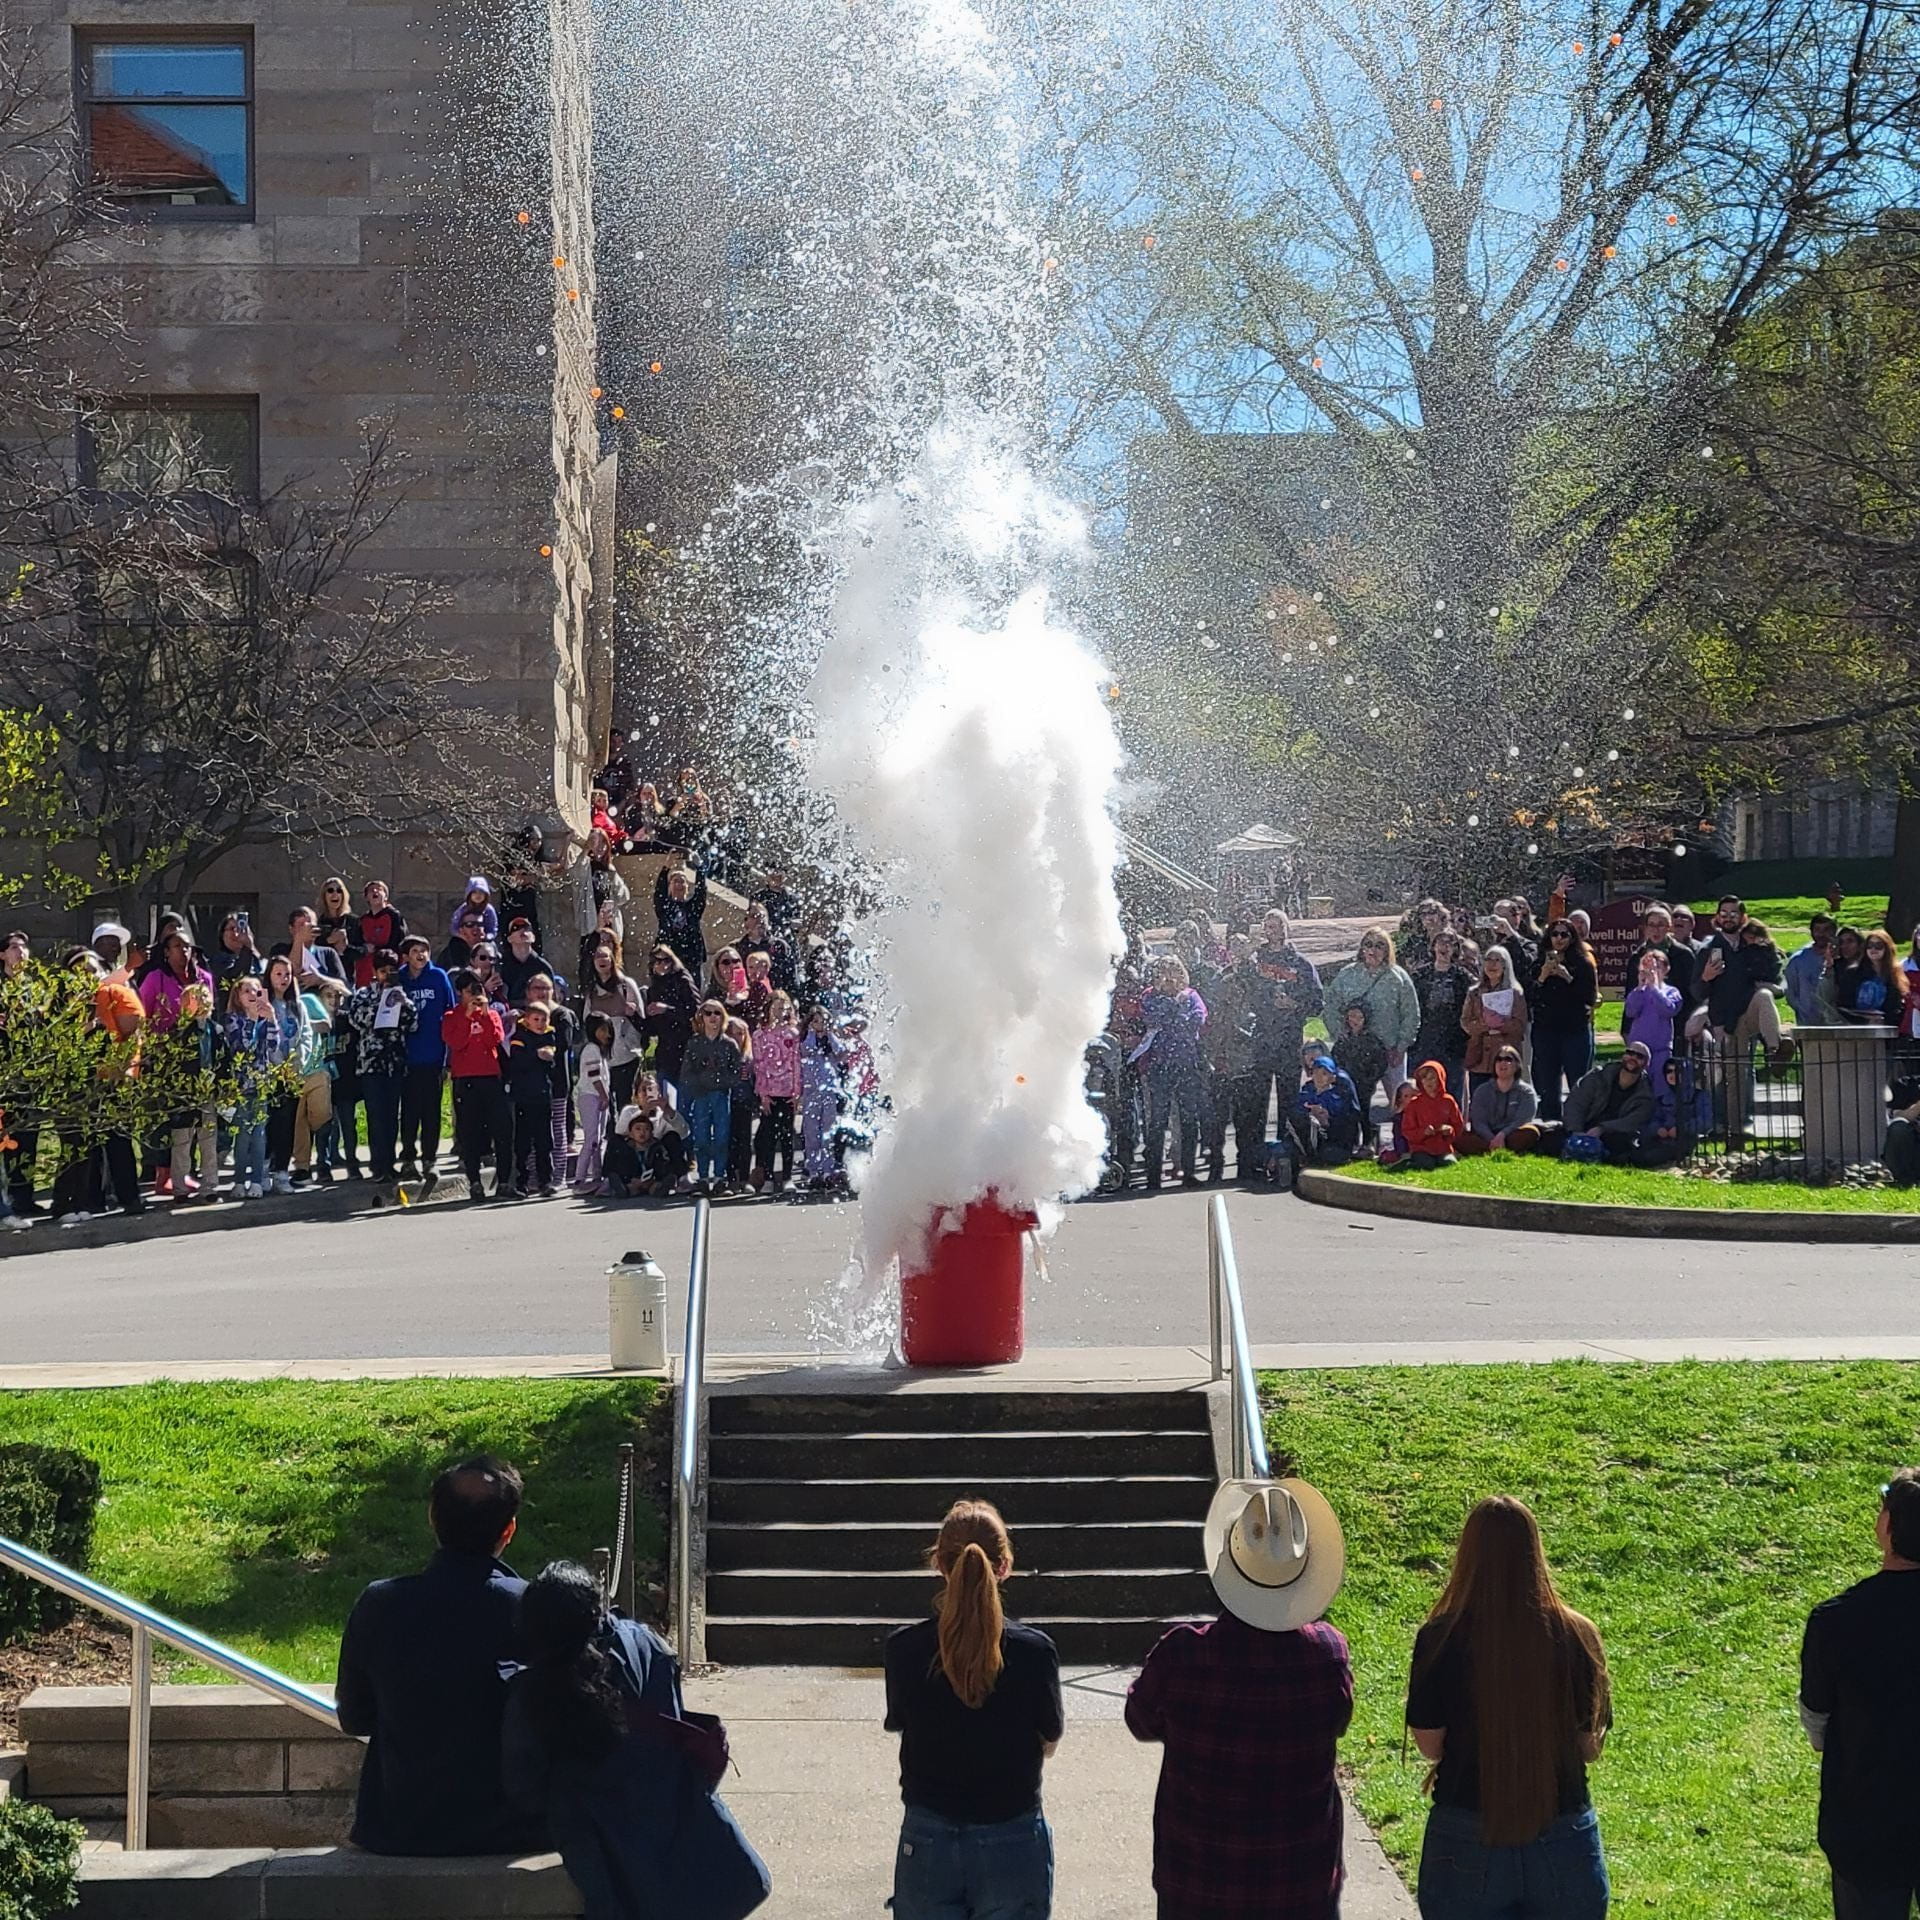 Image of a large red bin serving as a makeshift volcano for an engaging science experiment